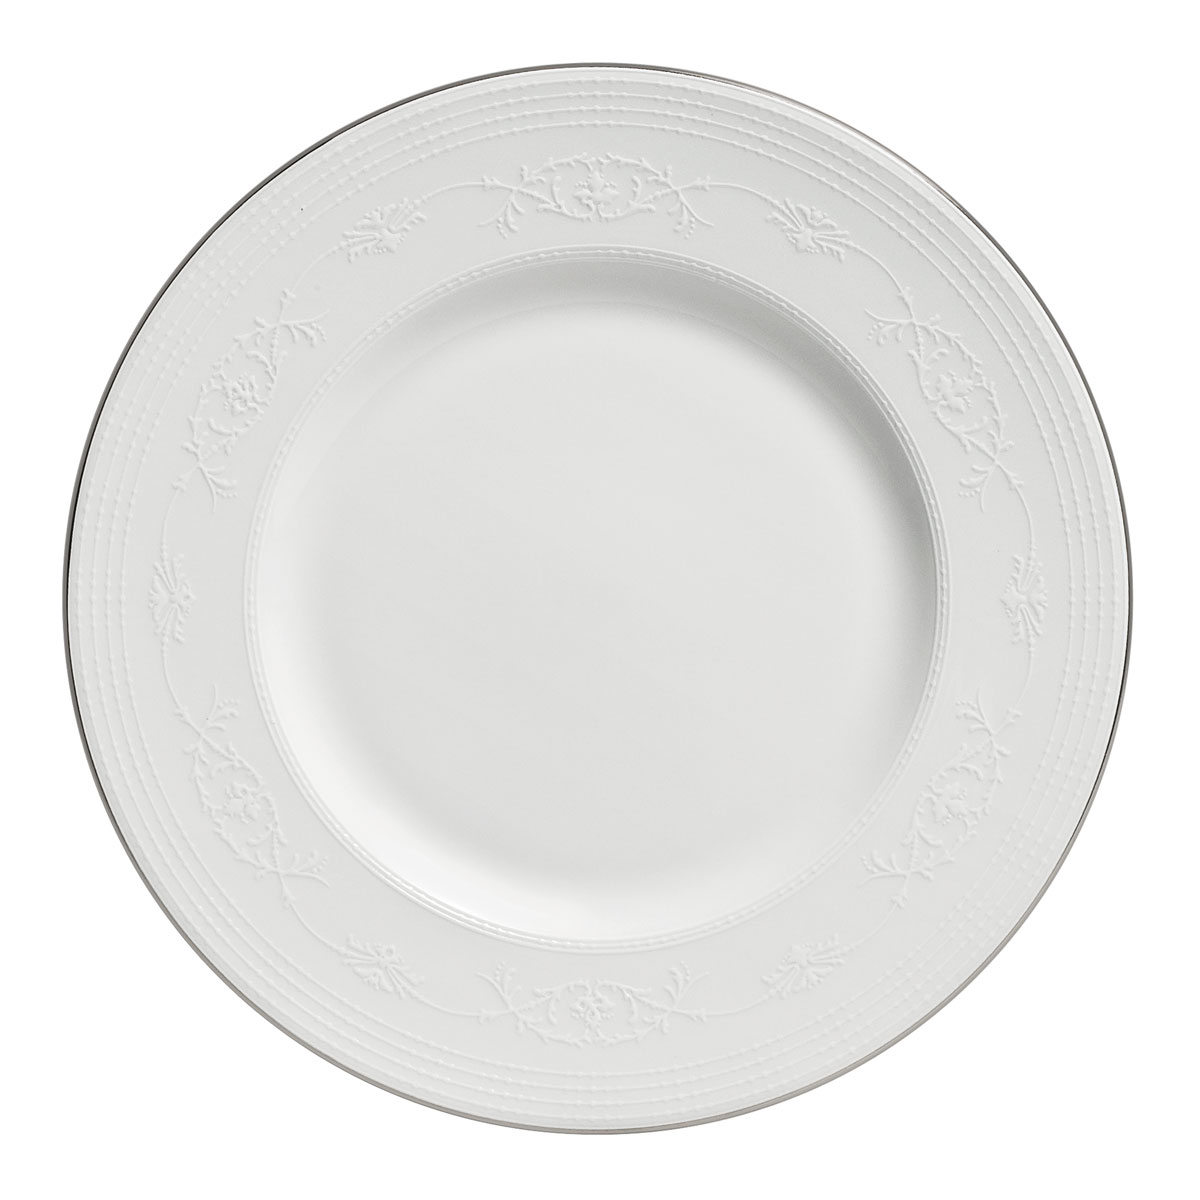 Wedgwood English Lace Accent Salad Plate, Single